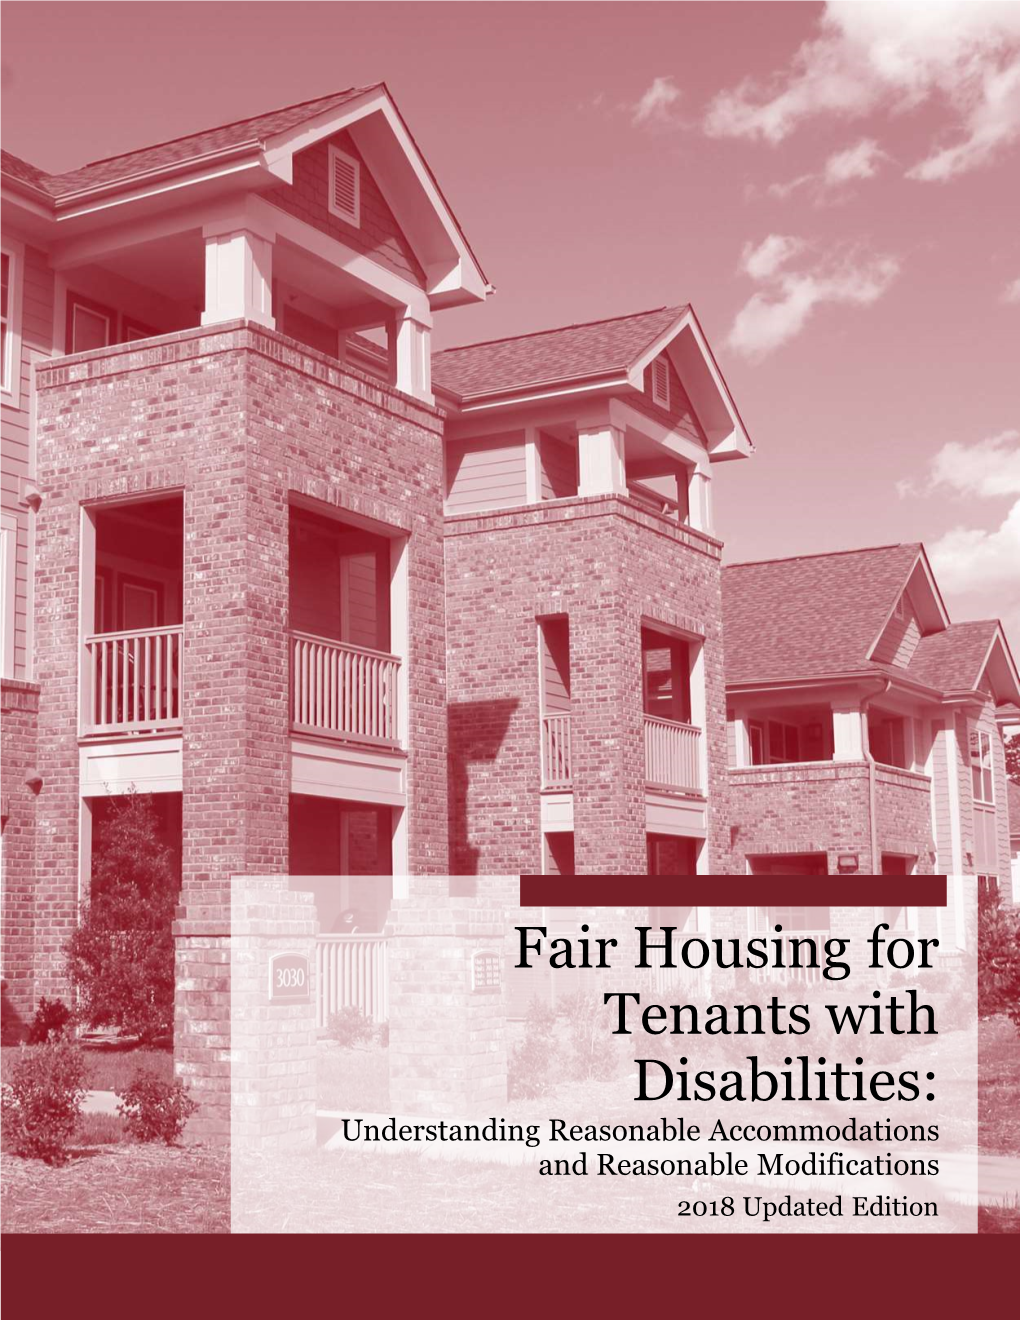 Fair Housing for Tenants with Disabilities: Understanding Reasonable Accommodations and Reasonable Modificati Ons 2018 Updated Edition